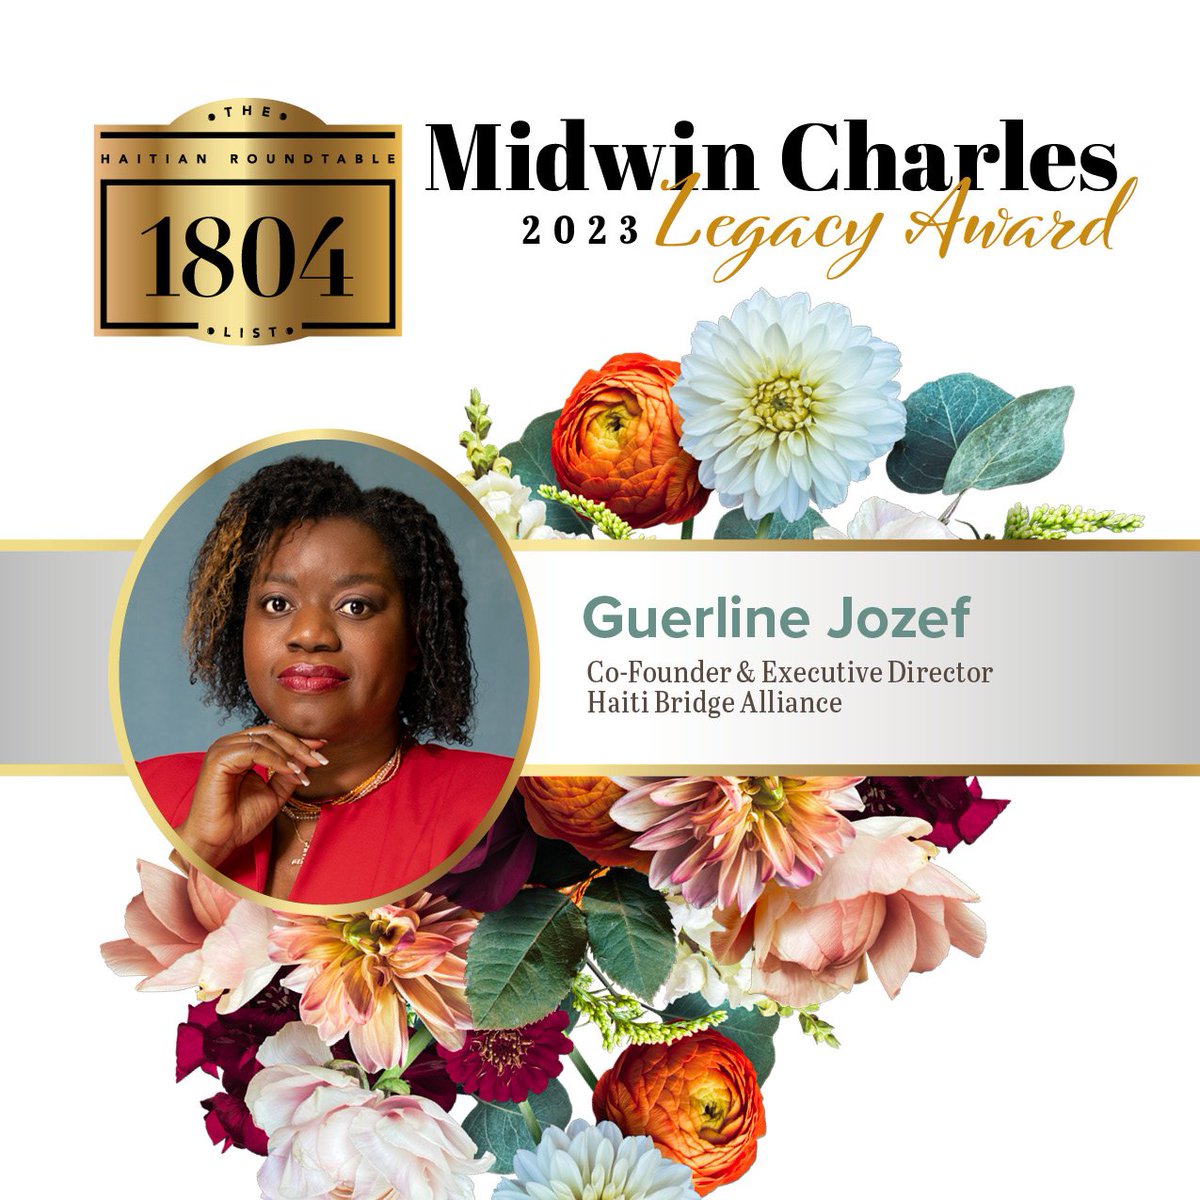 I'm honored to be the inaugural recipient of the @thehaitianroundtable @MidwinCharles Legacy Award  in memory of HRT’s beloved board member, attorney, TV legal analyst & radio host. Congratulations HRT on your 15th Anniversary! I look forward to the 1804 celebration on June 10th.